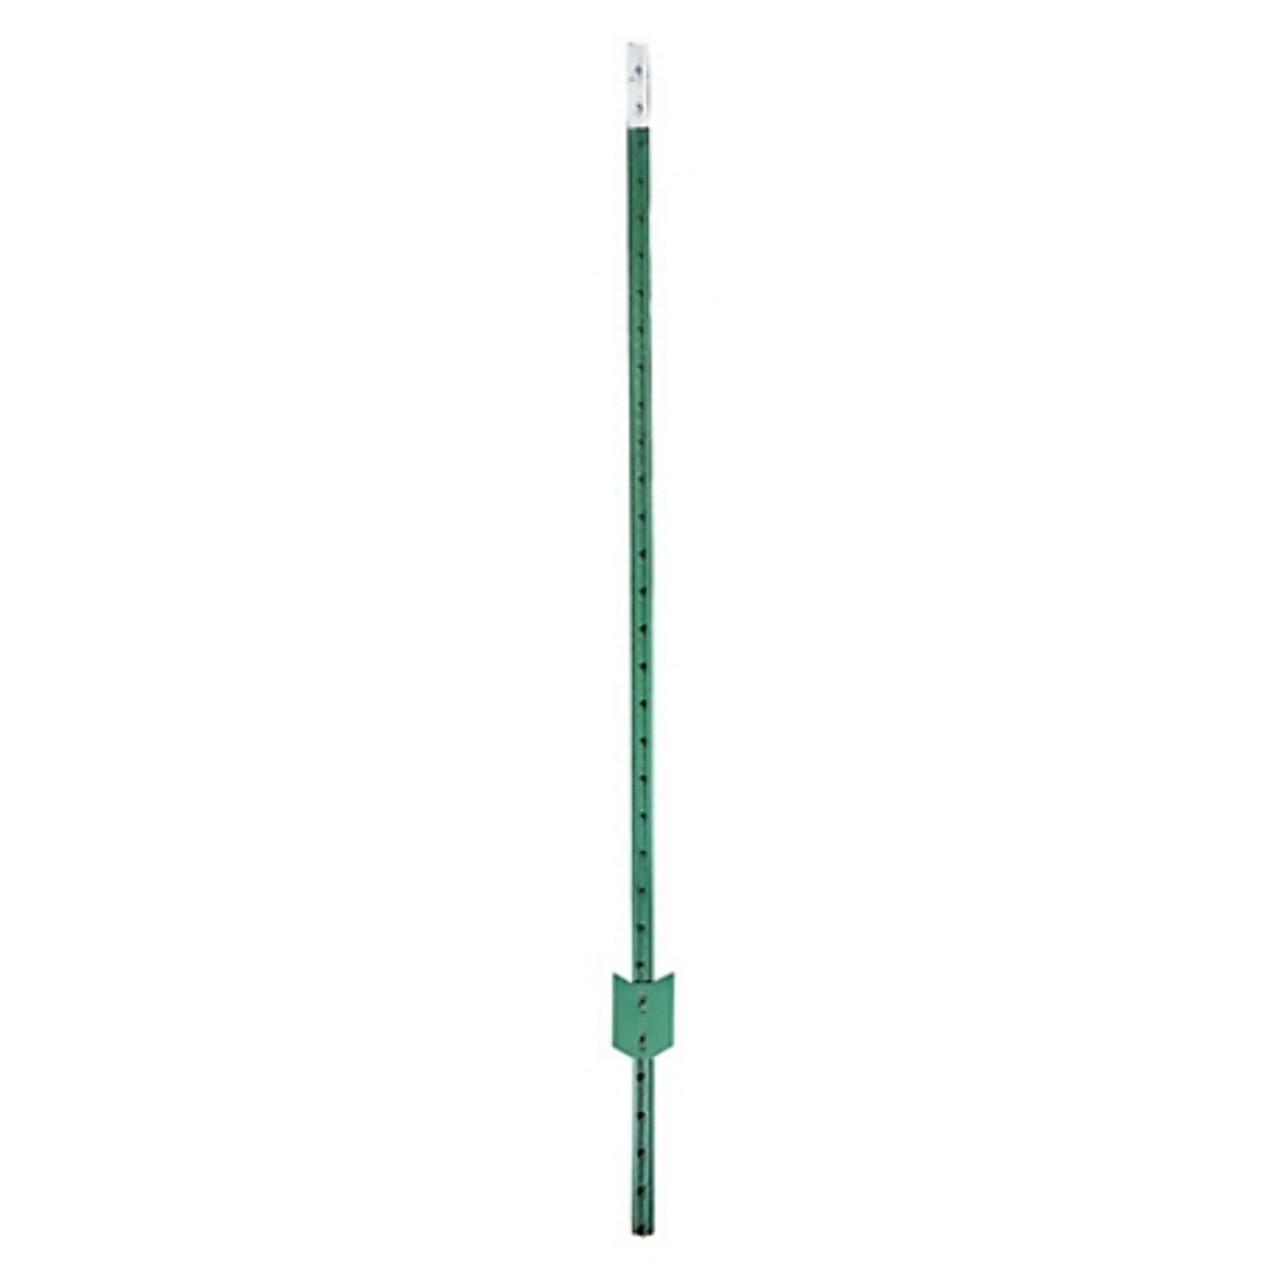 6 ft. Studded Fence T-Post, 1.33 lb./ft.